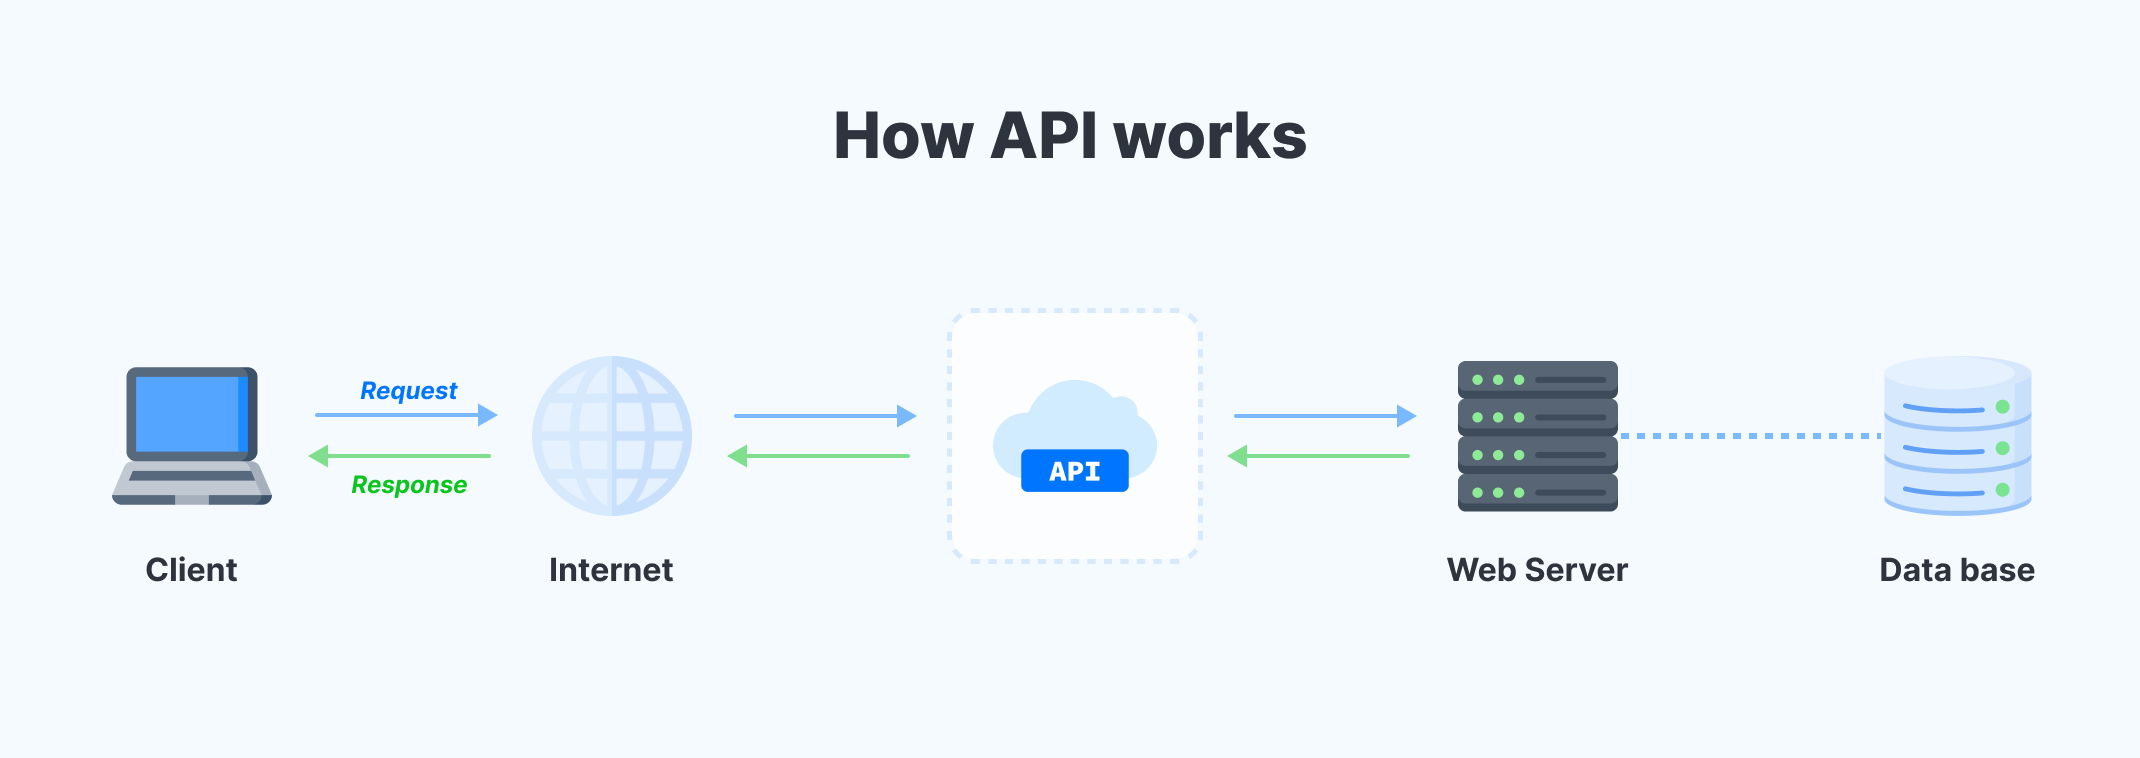 Endpoints in API: how it works